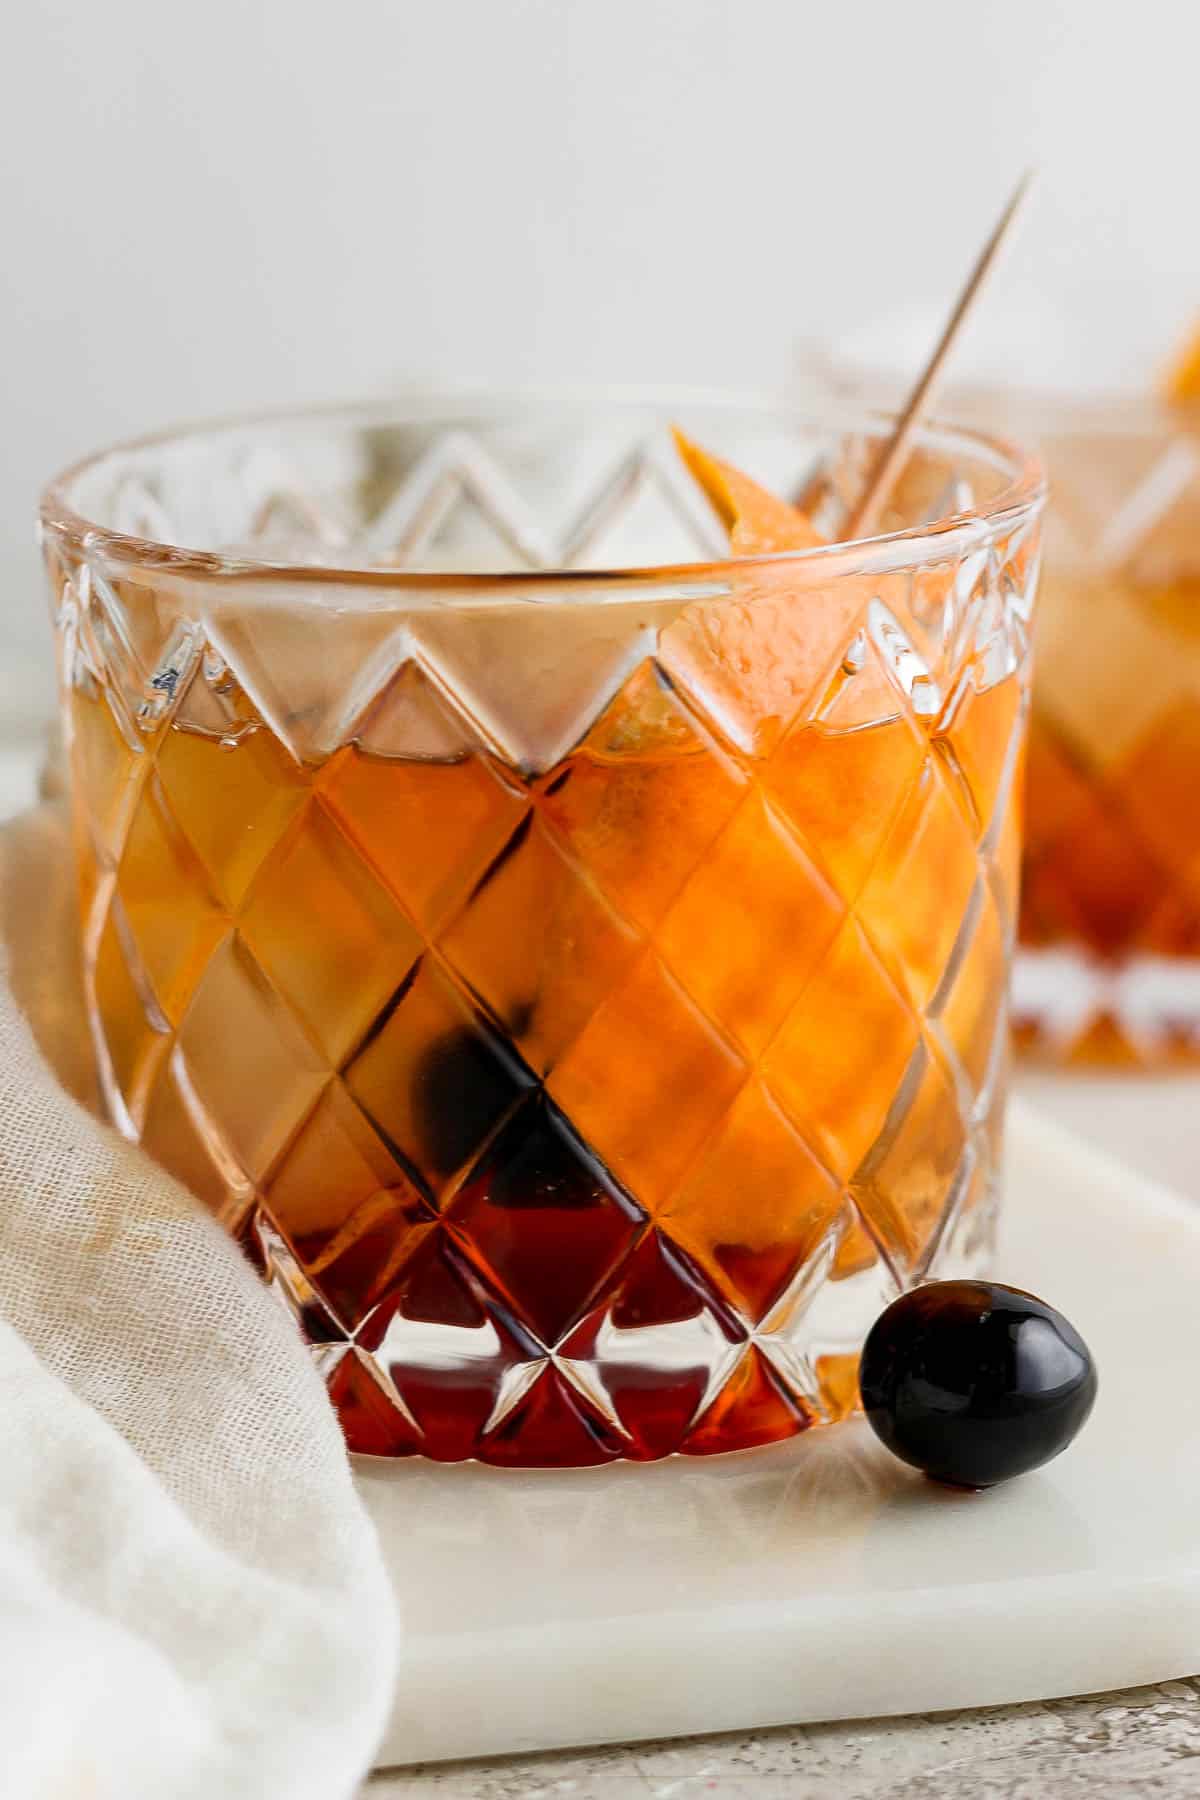 Brandy old fashioned in a low ball glass garnished with an orange peel.